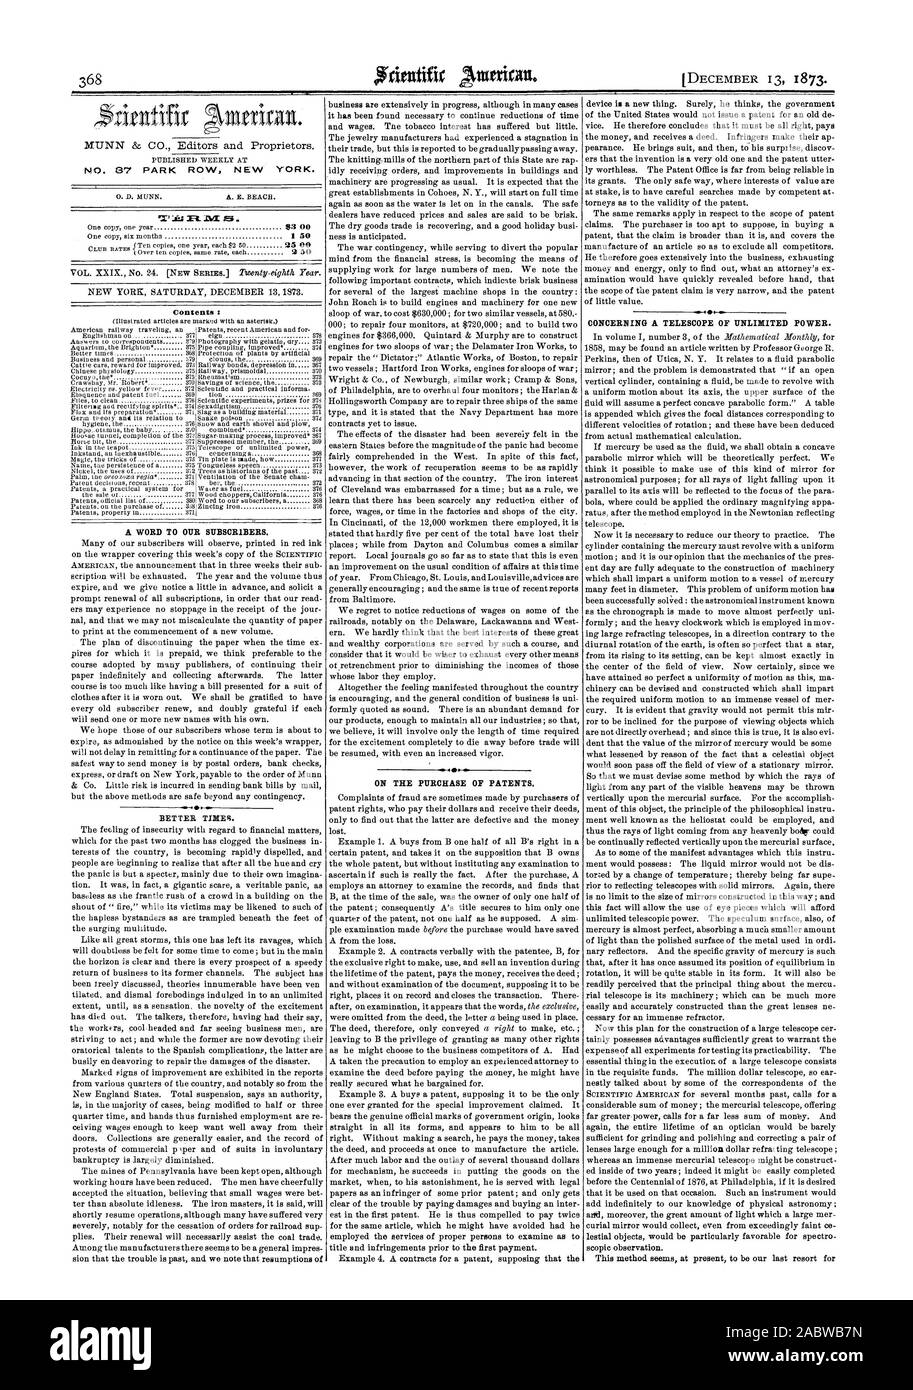 NO. 87 PARK ROW NEW YORK. I. i& . Contents : A WORD TO OUR SUBSCRIBERS. BETTER TINES. ON THE PURCHASE OF PATENTS. CONCERNING A TELESCOPE OF UNLIMITED POWER., scientific american, 1873-12-13 Stock Photo